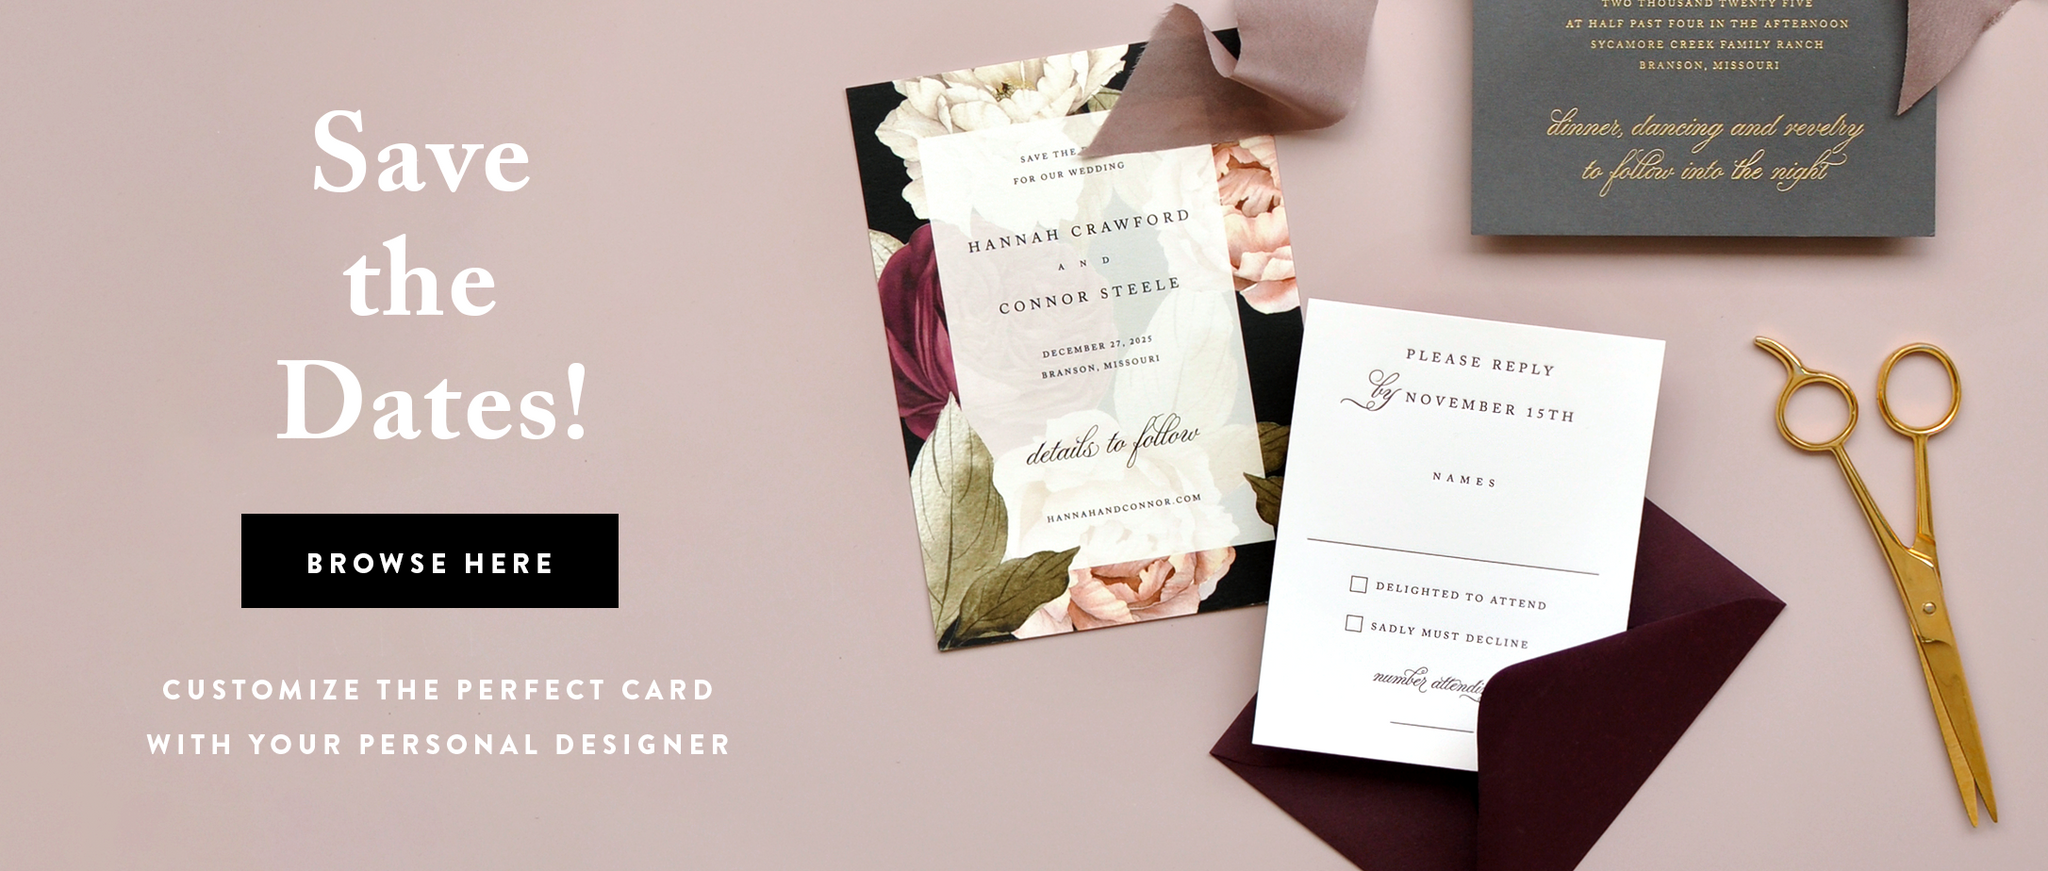 Save the Dates! Customize the perfect card with your personal designer. Browse here.